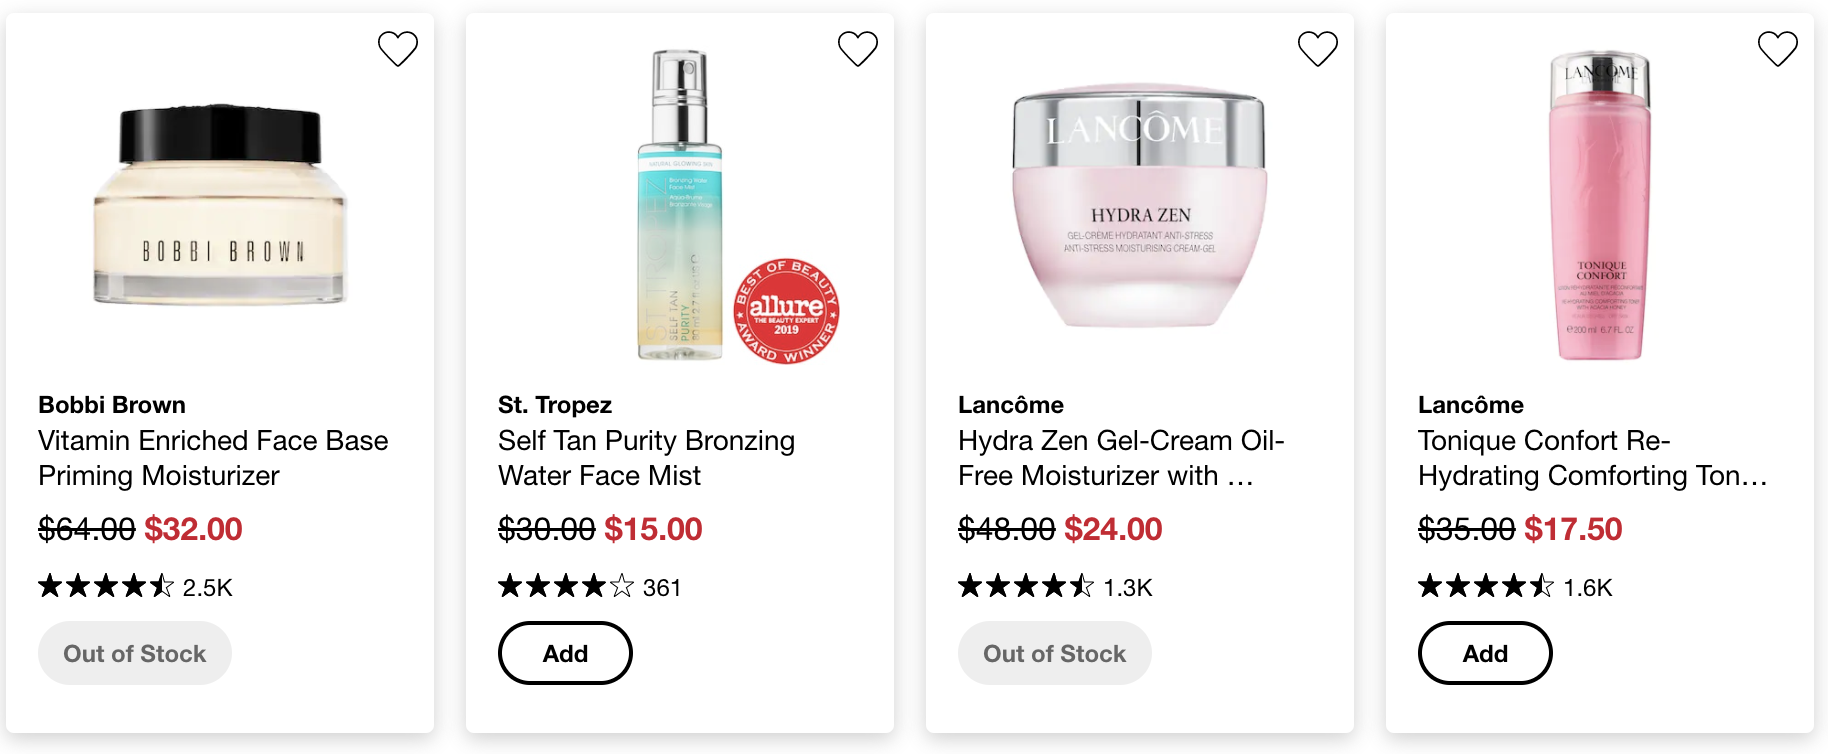 Sephora Oh Snap! 50 off select favorite beauty items 4/2 today only